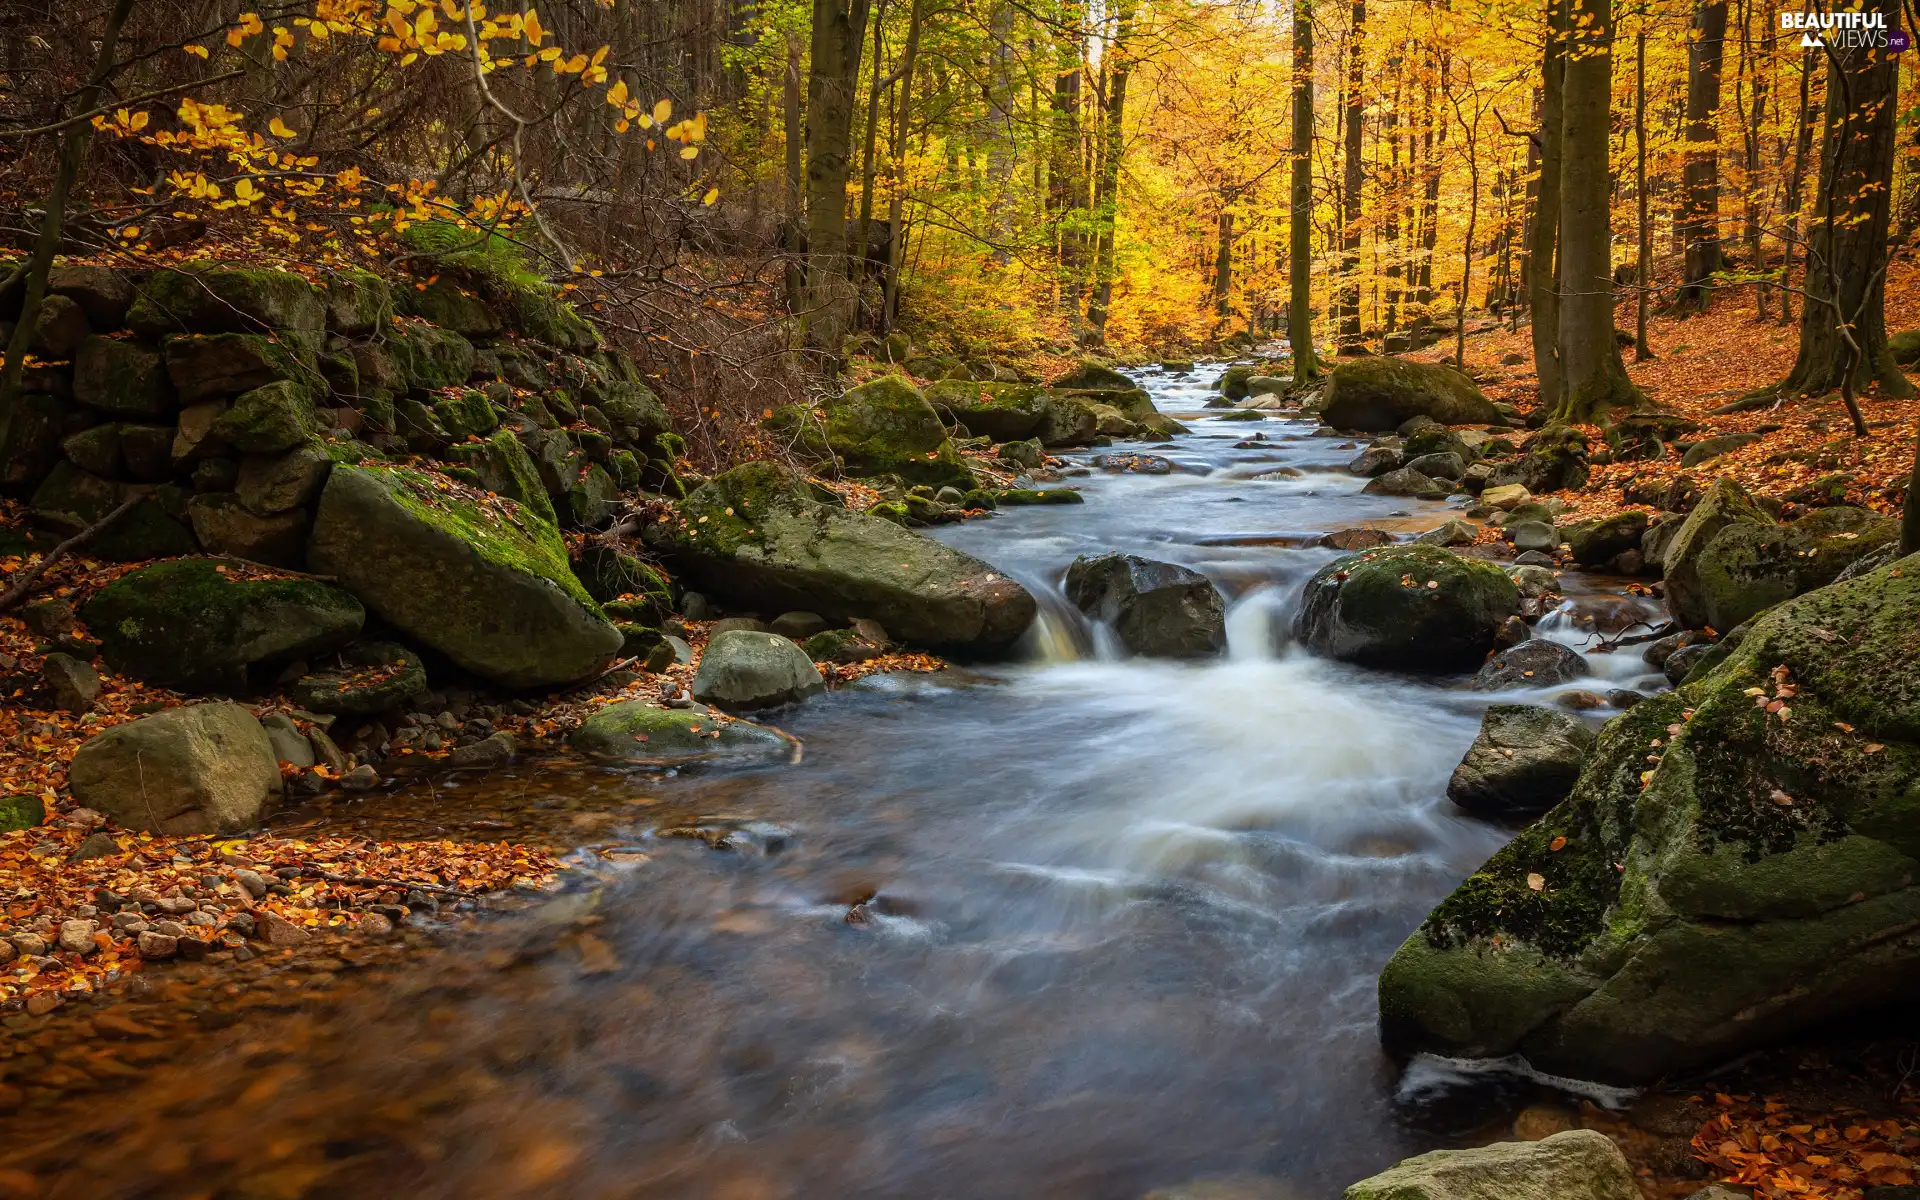 viewes, forest, Stones, trees, autumn, River, Leaf